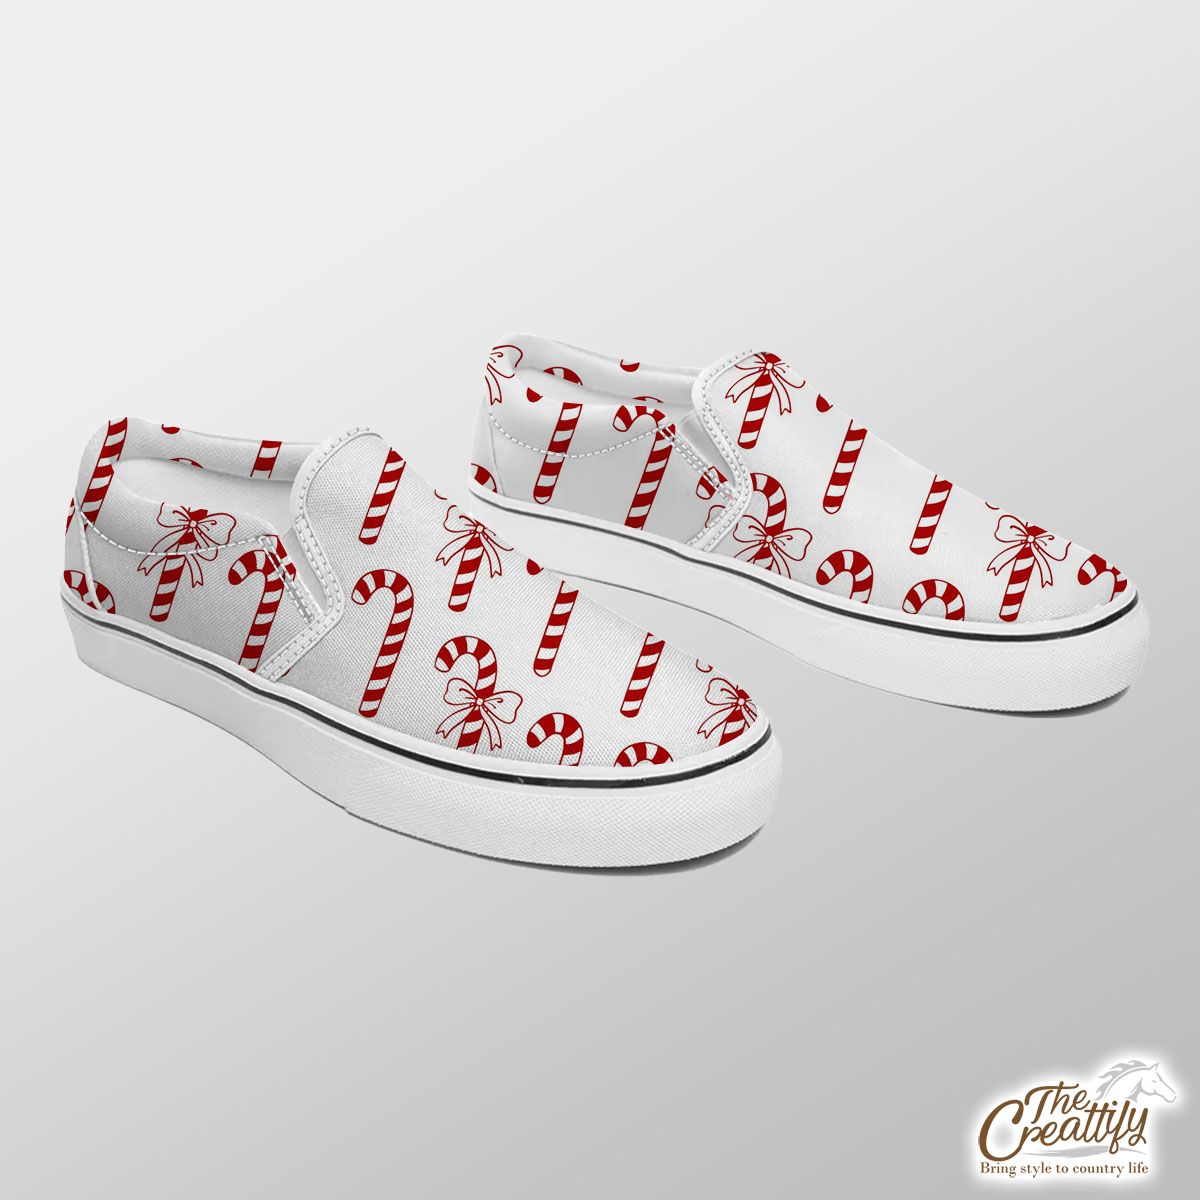 Christmas Candy Cane Seamless Pattern White Background Slip On Sneakers